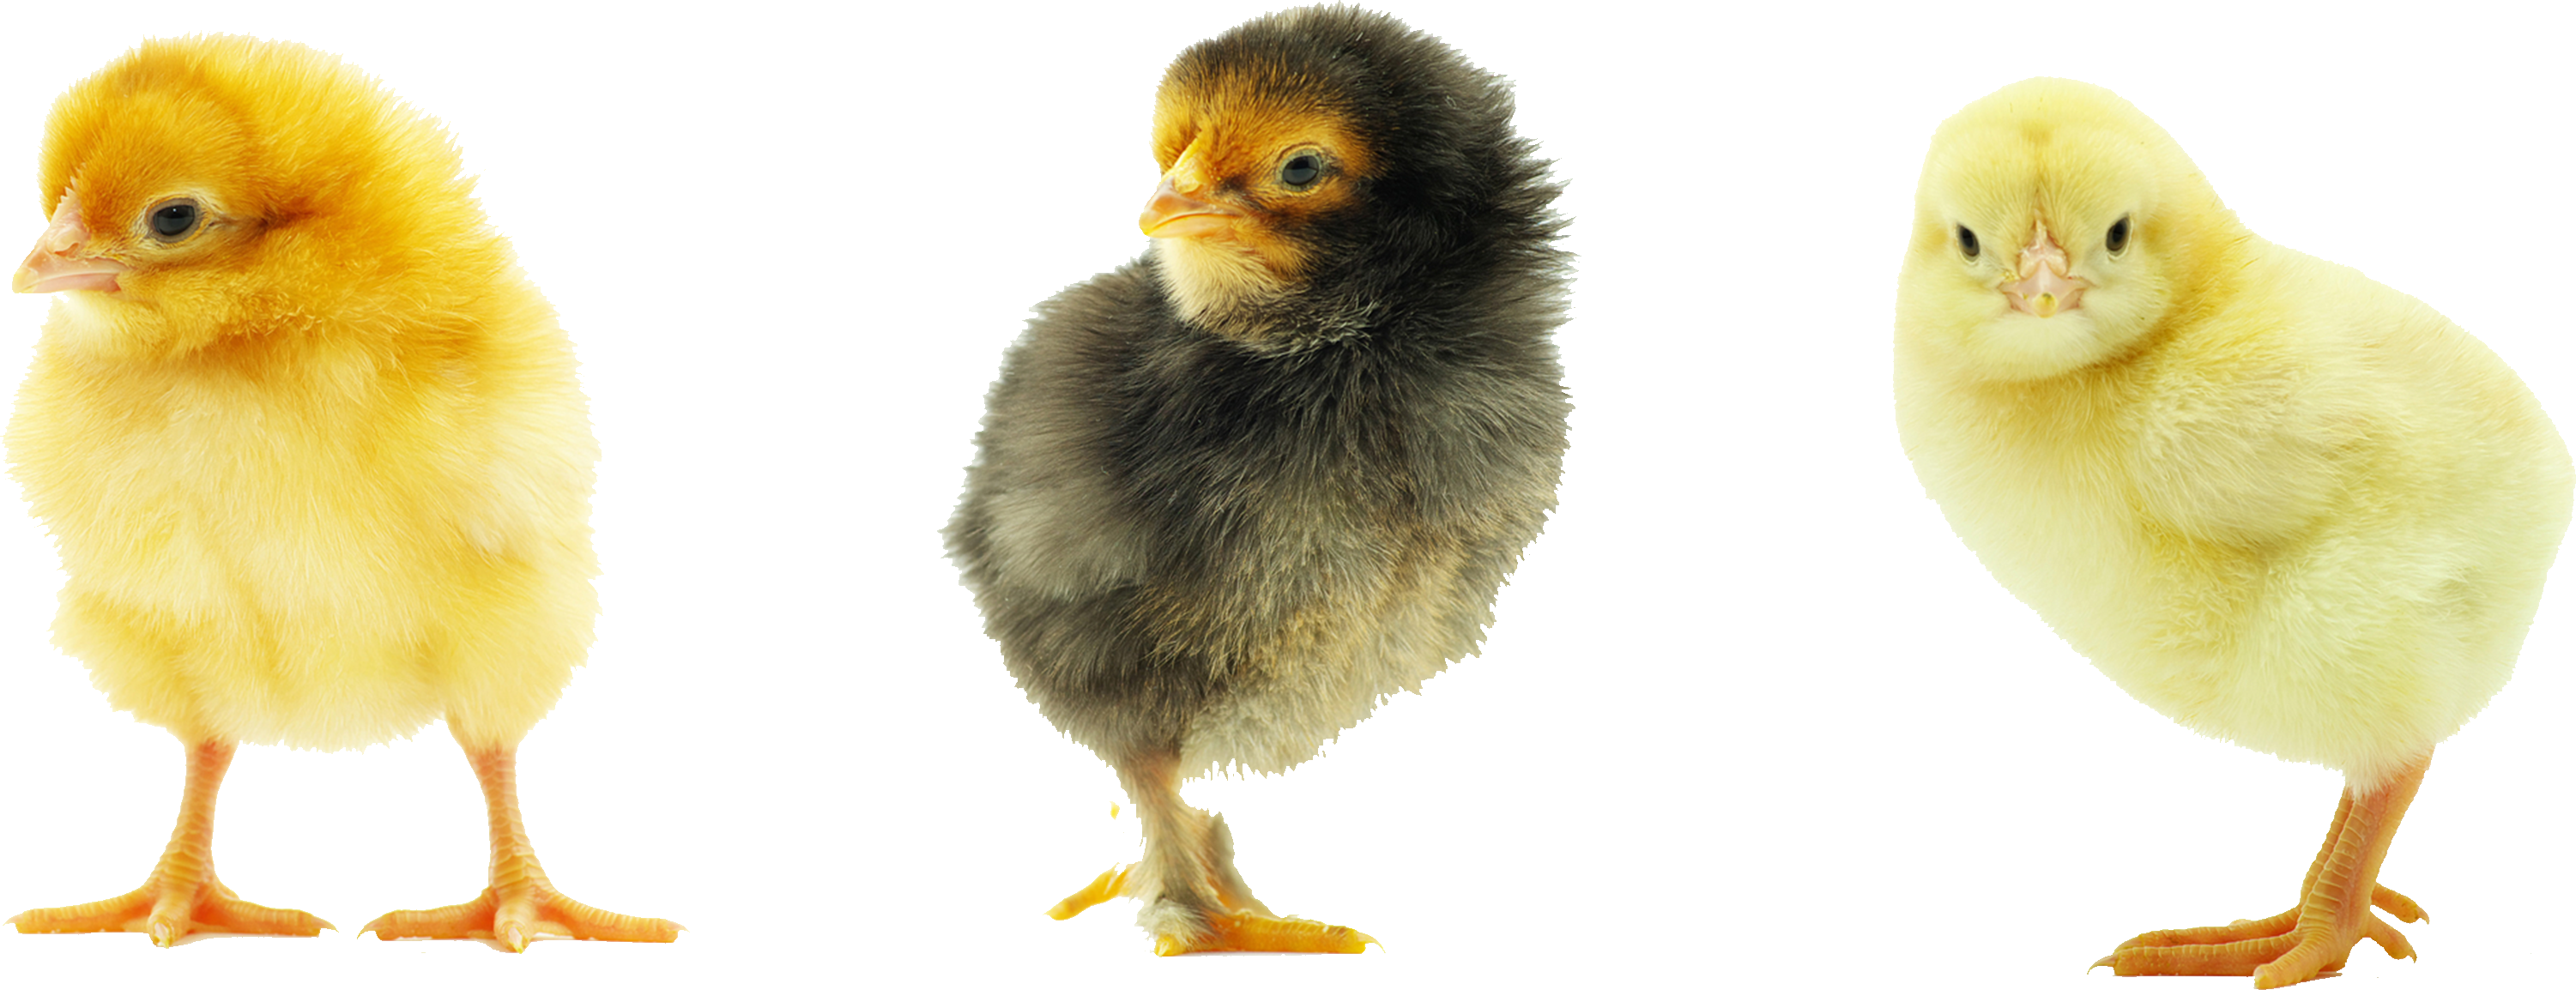 Chick PNG Images Transparent Free Download.